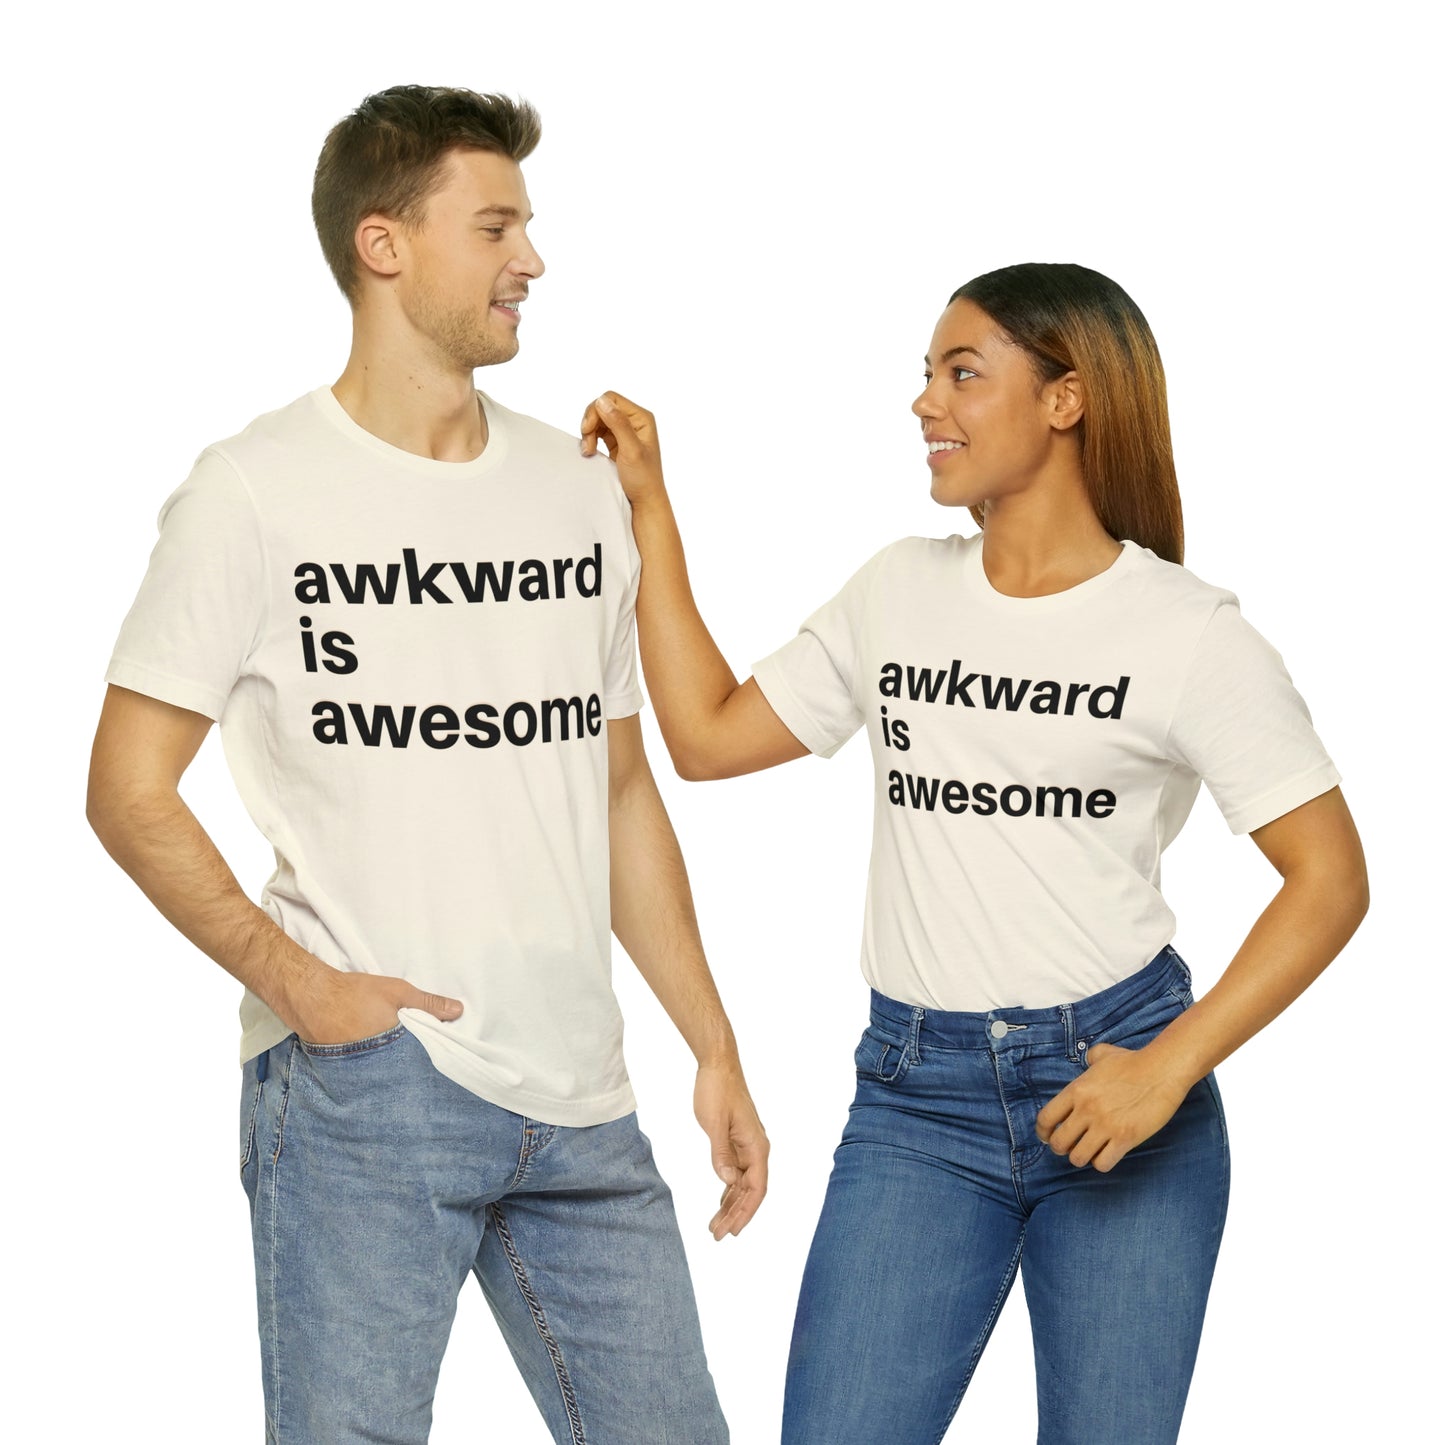 Awkward is Awesome T-shirt